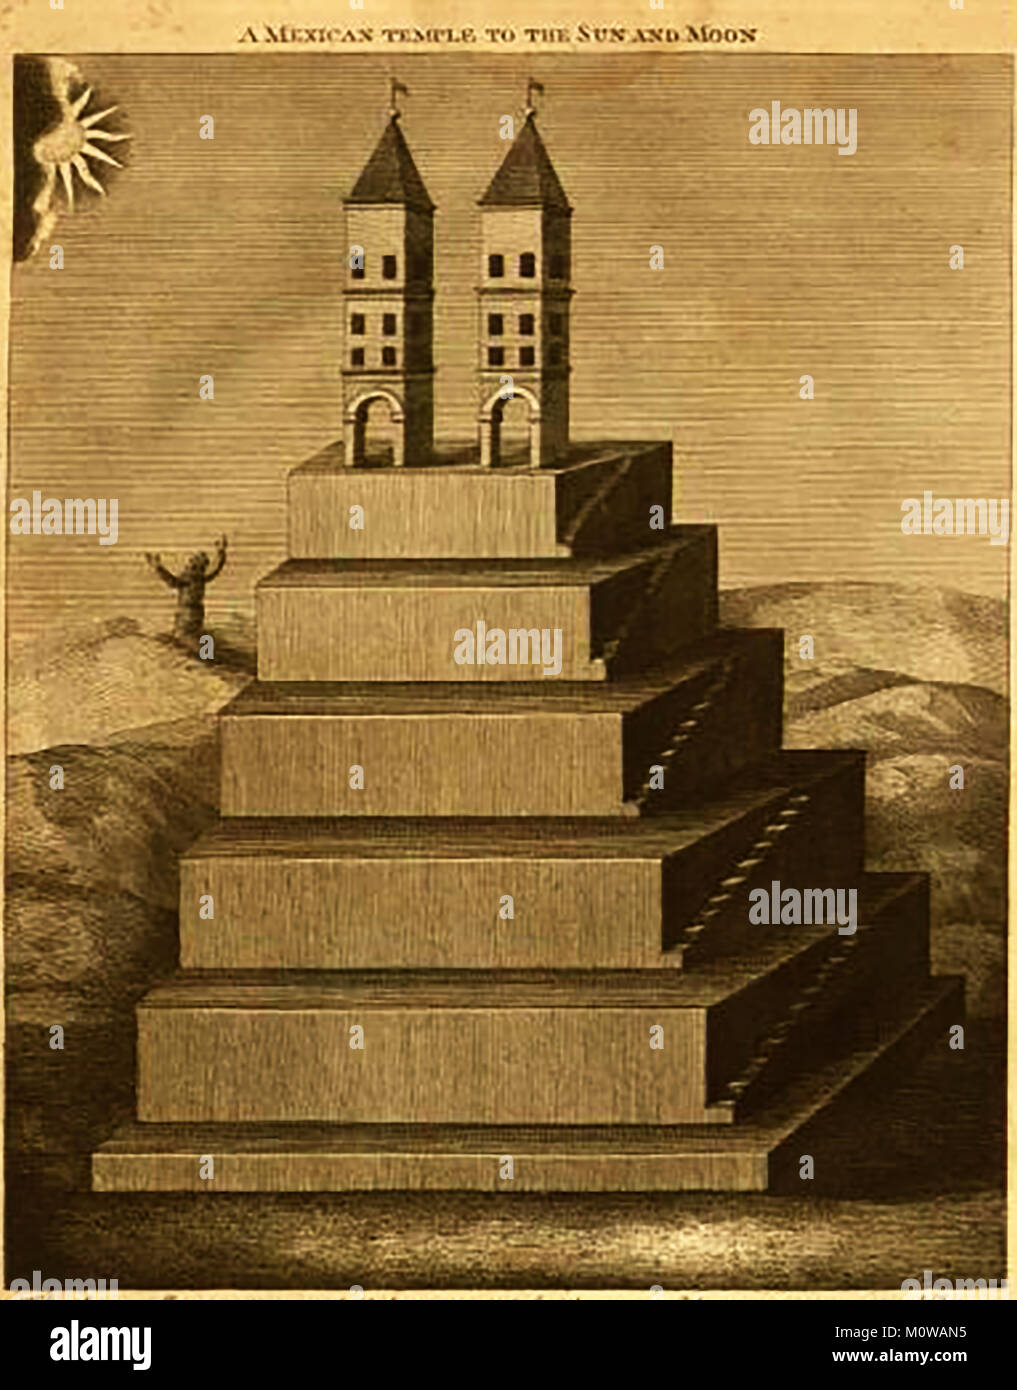 TOWER OF BABEL / BABYLON -Comparative mythology -A Mexican temple to the sun & moon from 'Ruins of Babylon' by Claudius James Rich 1816 Stock Photo